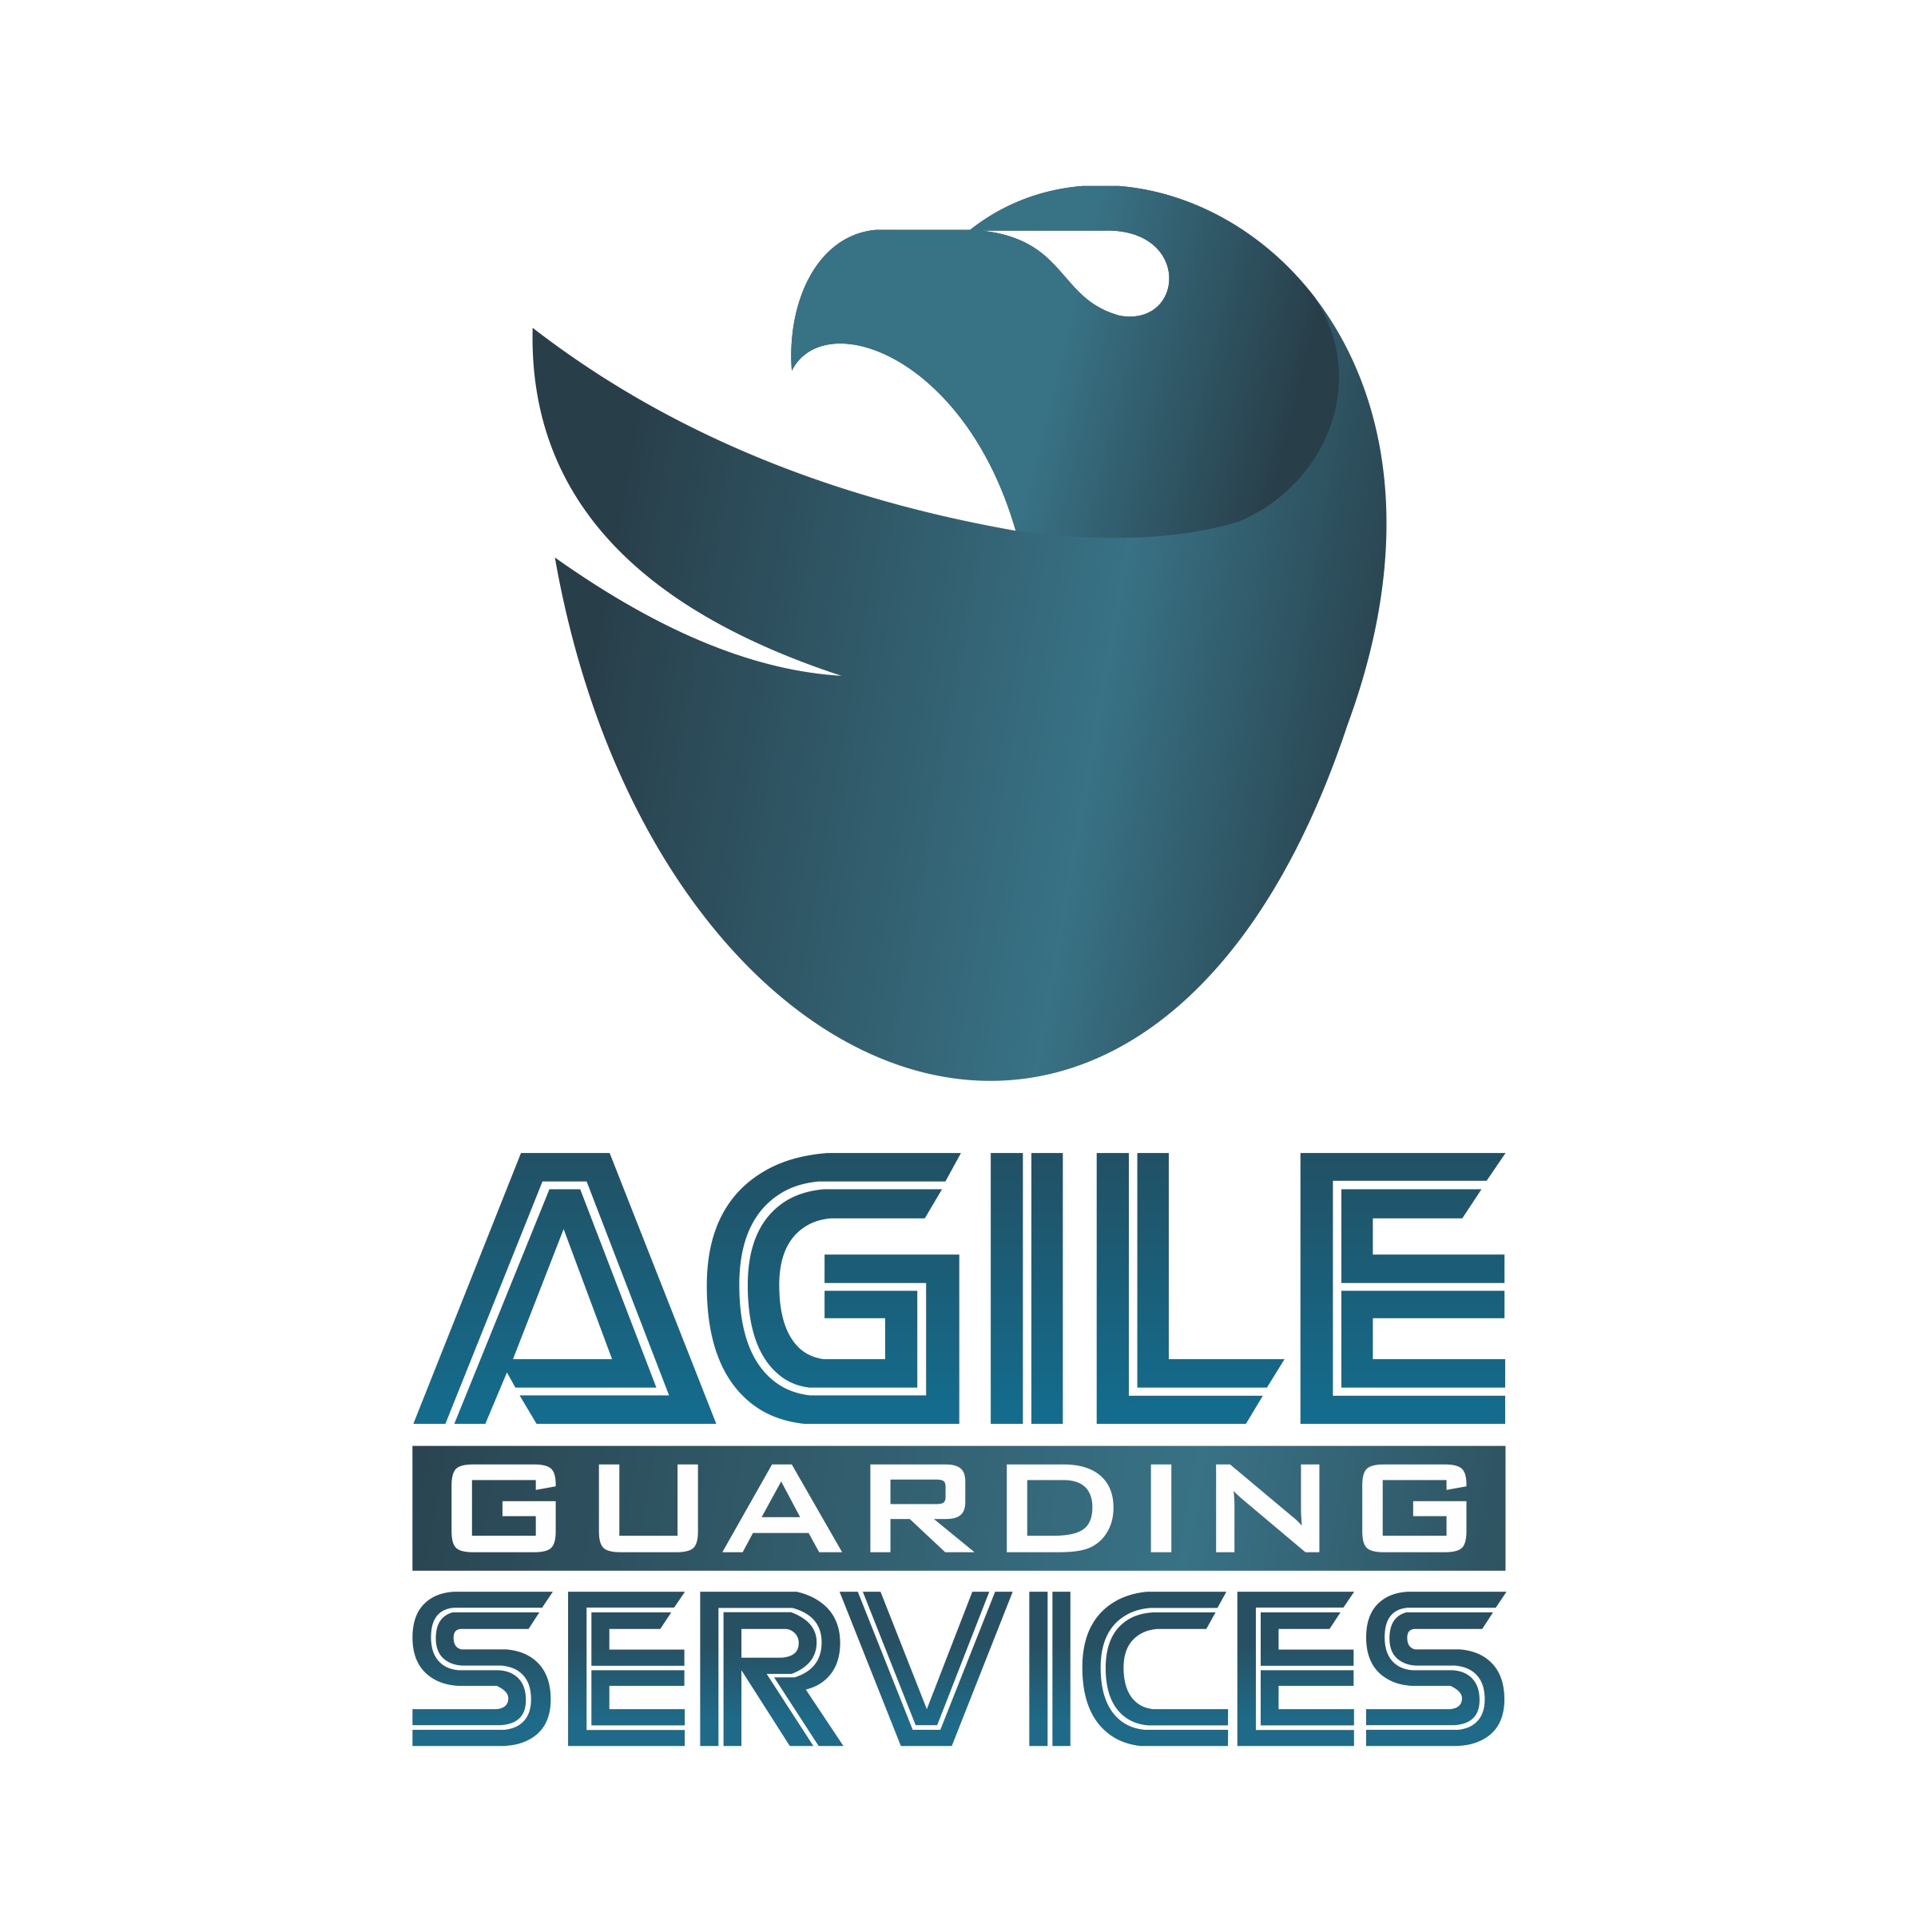 Agile Guarding Services Limited